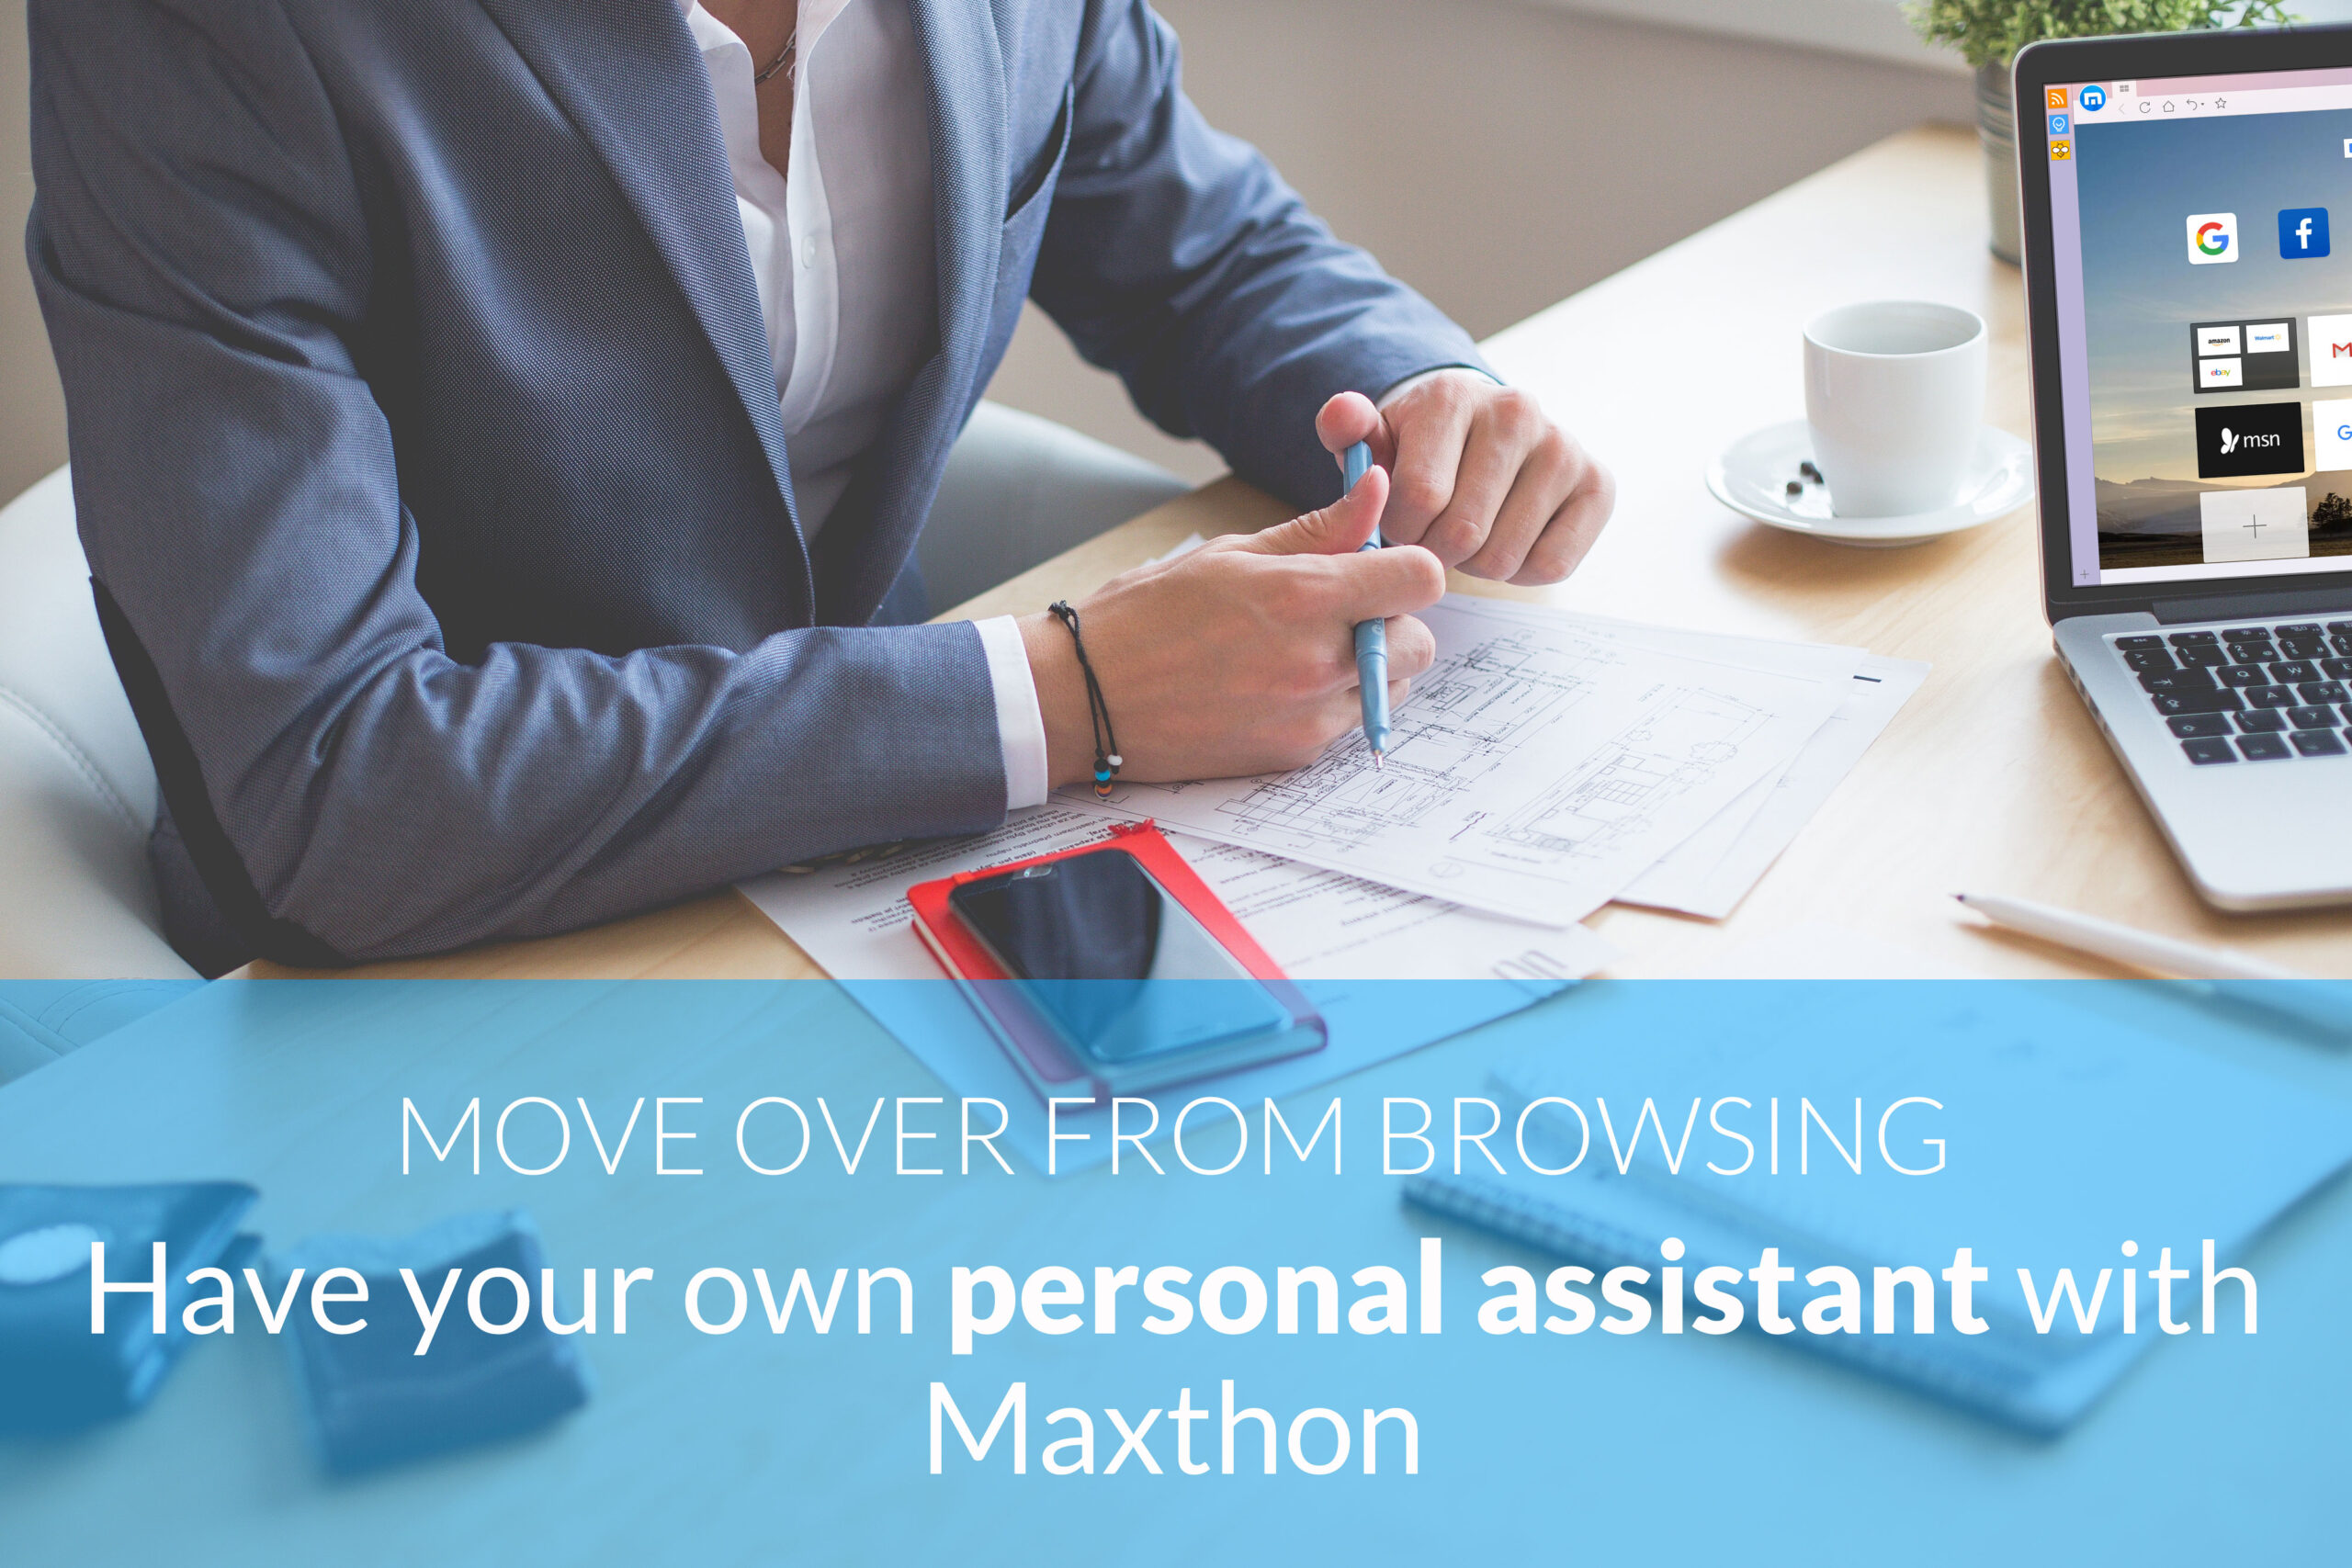 Move over from Browsing: Have your own personal assistant with Maxthon